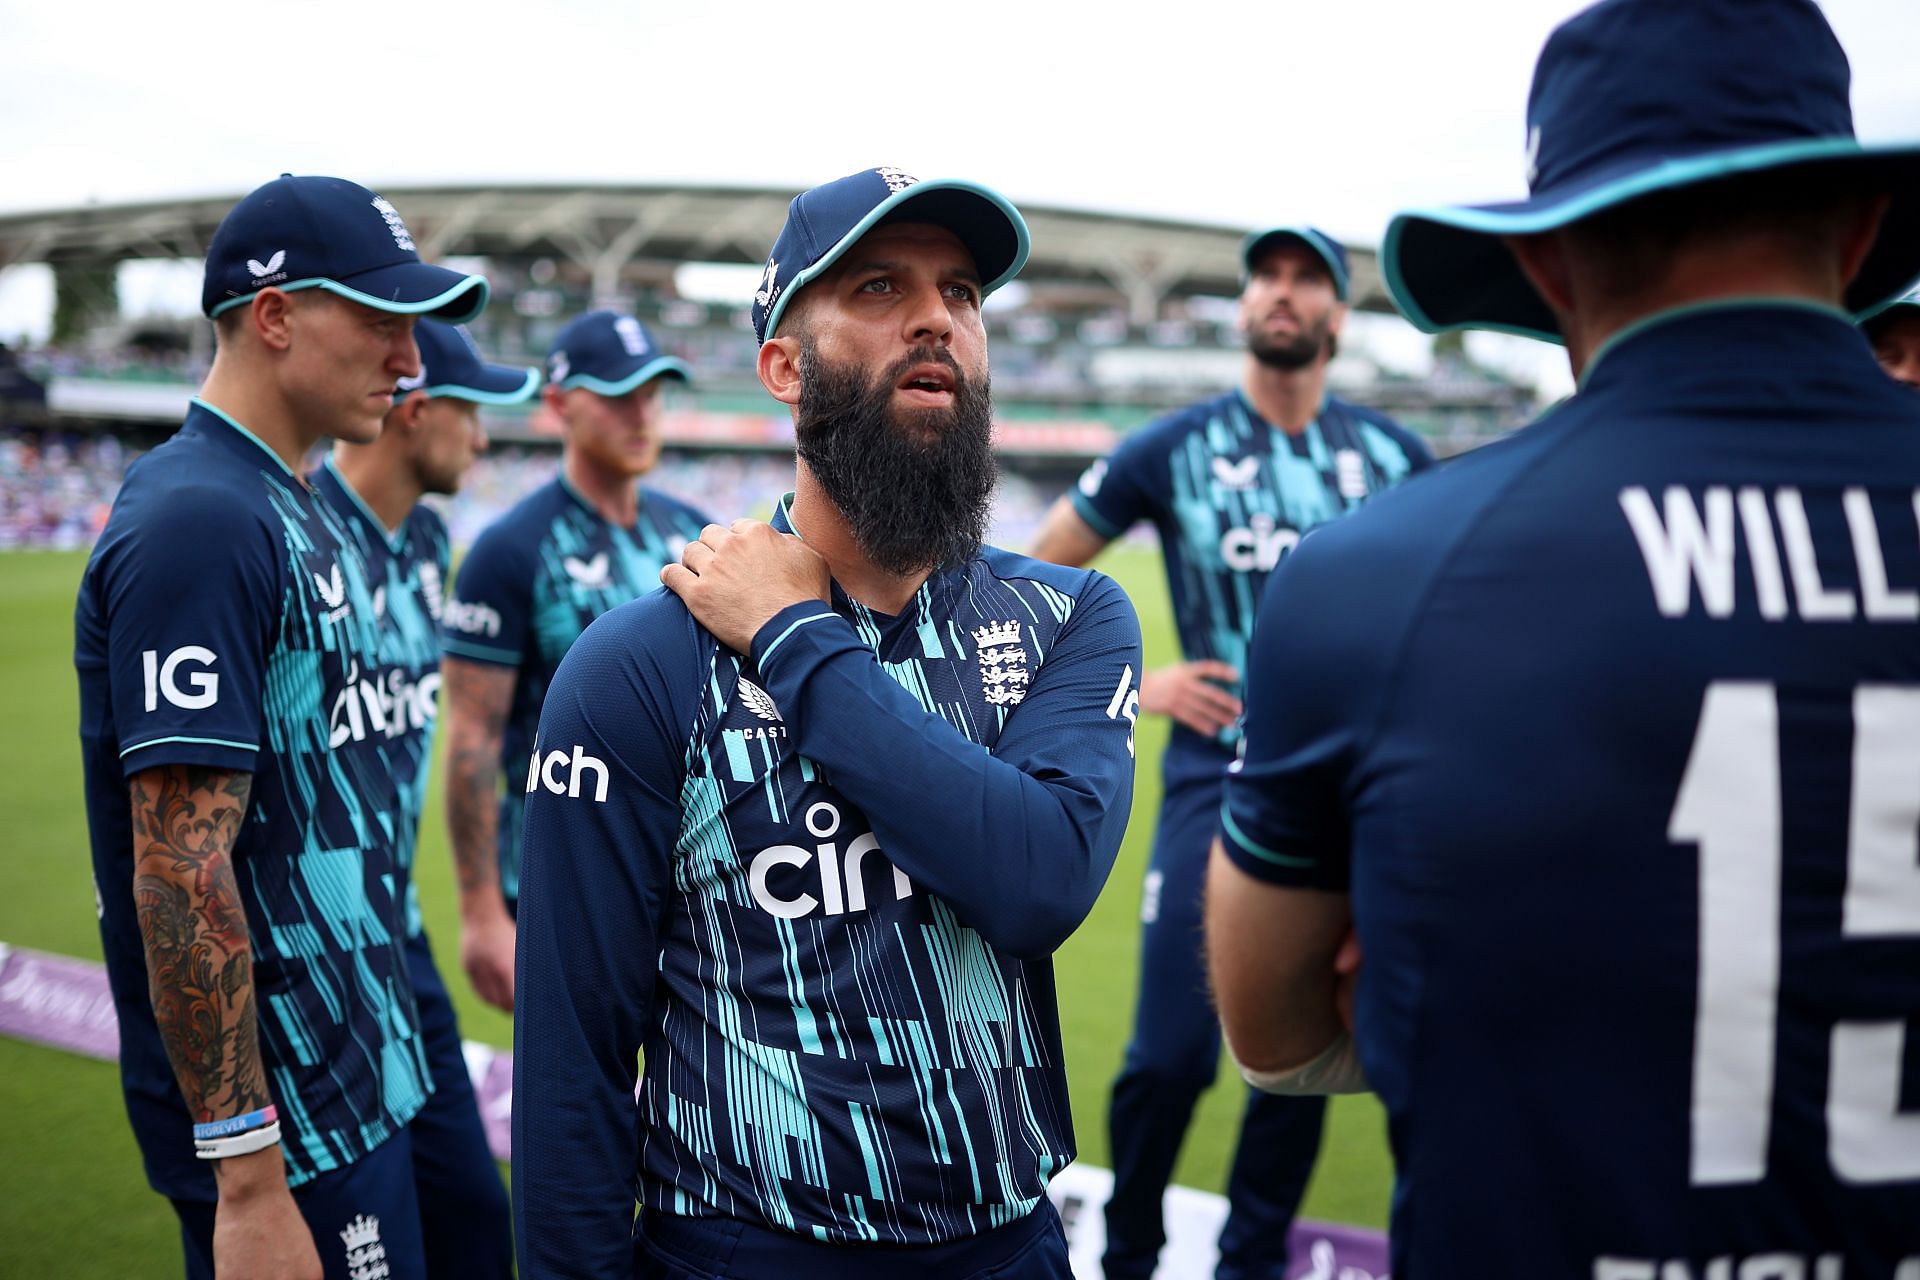 England need to win the second ODI to remain alive in the series